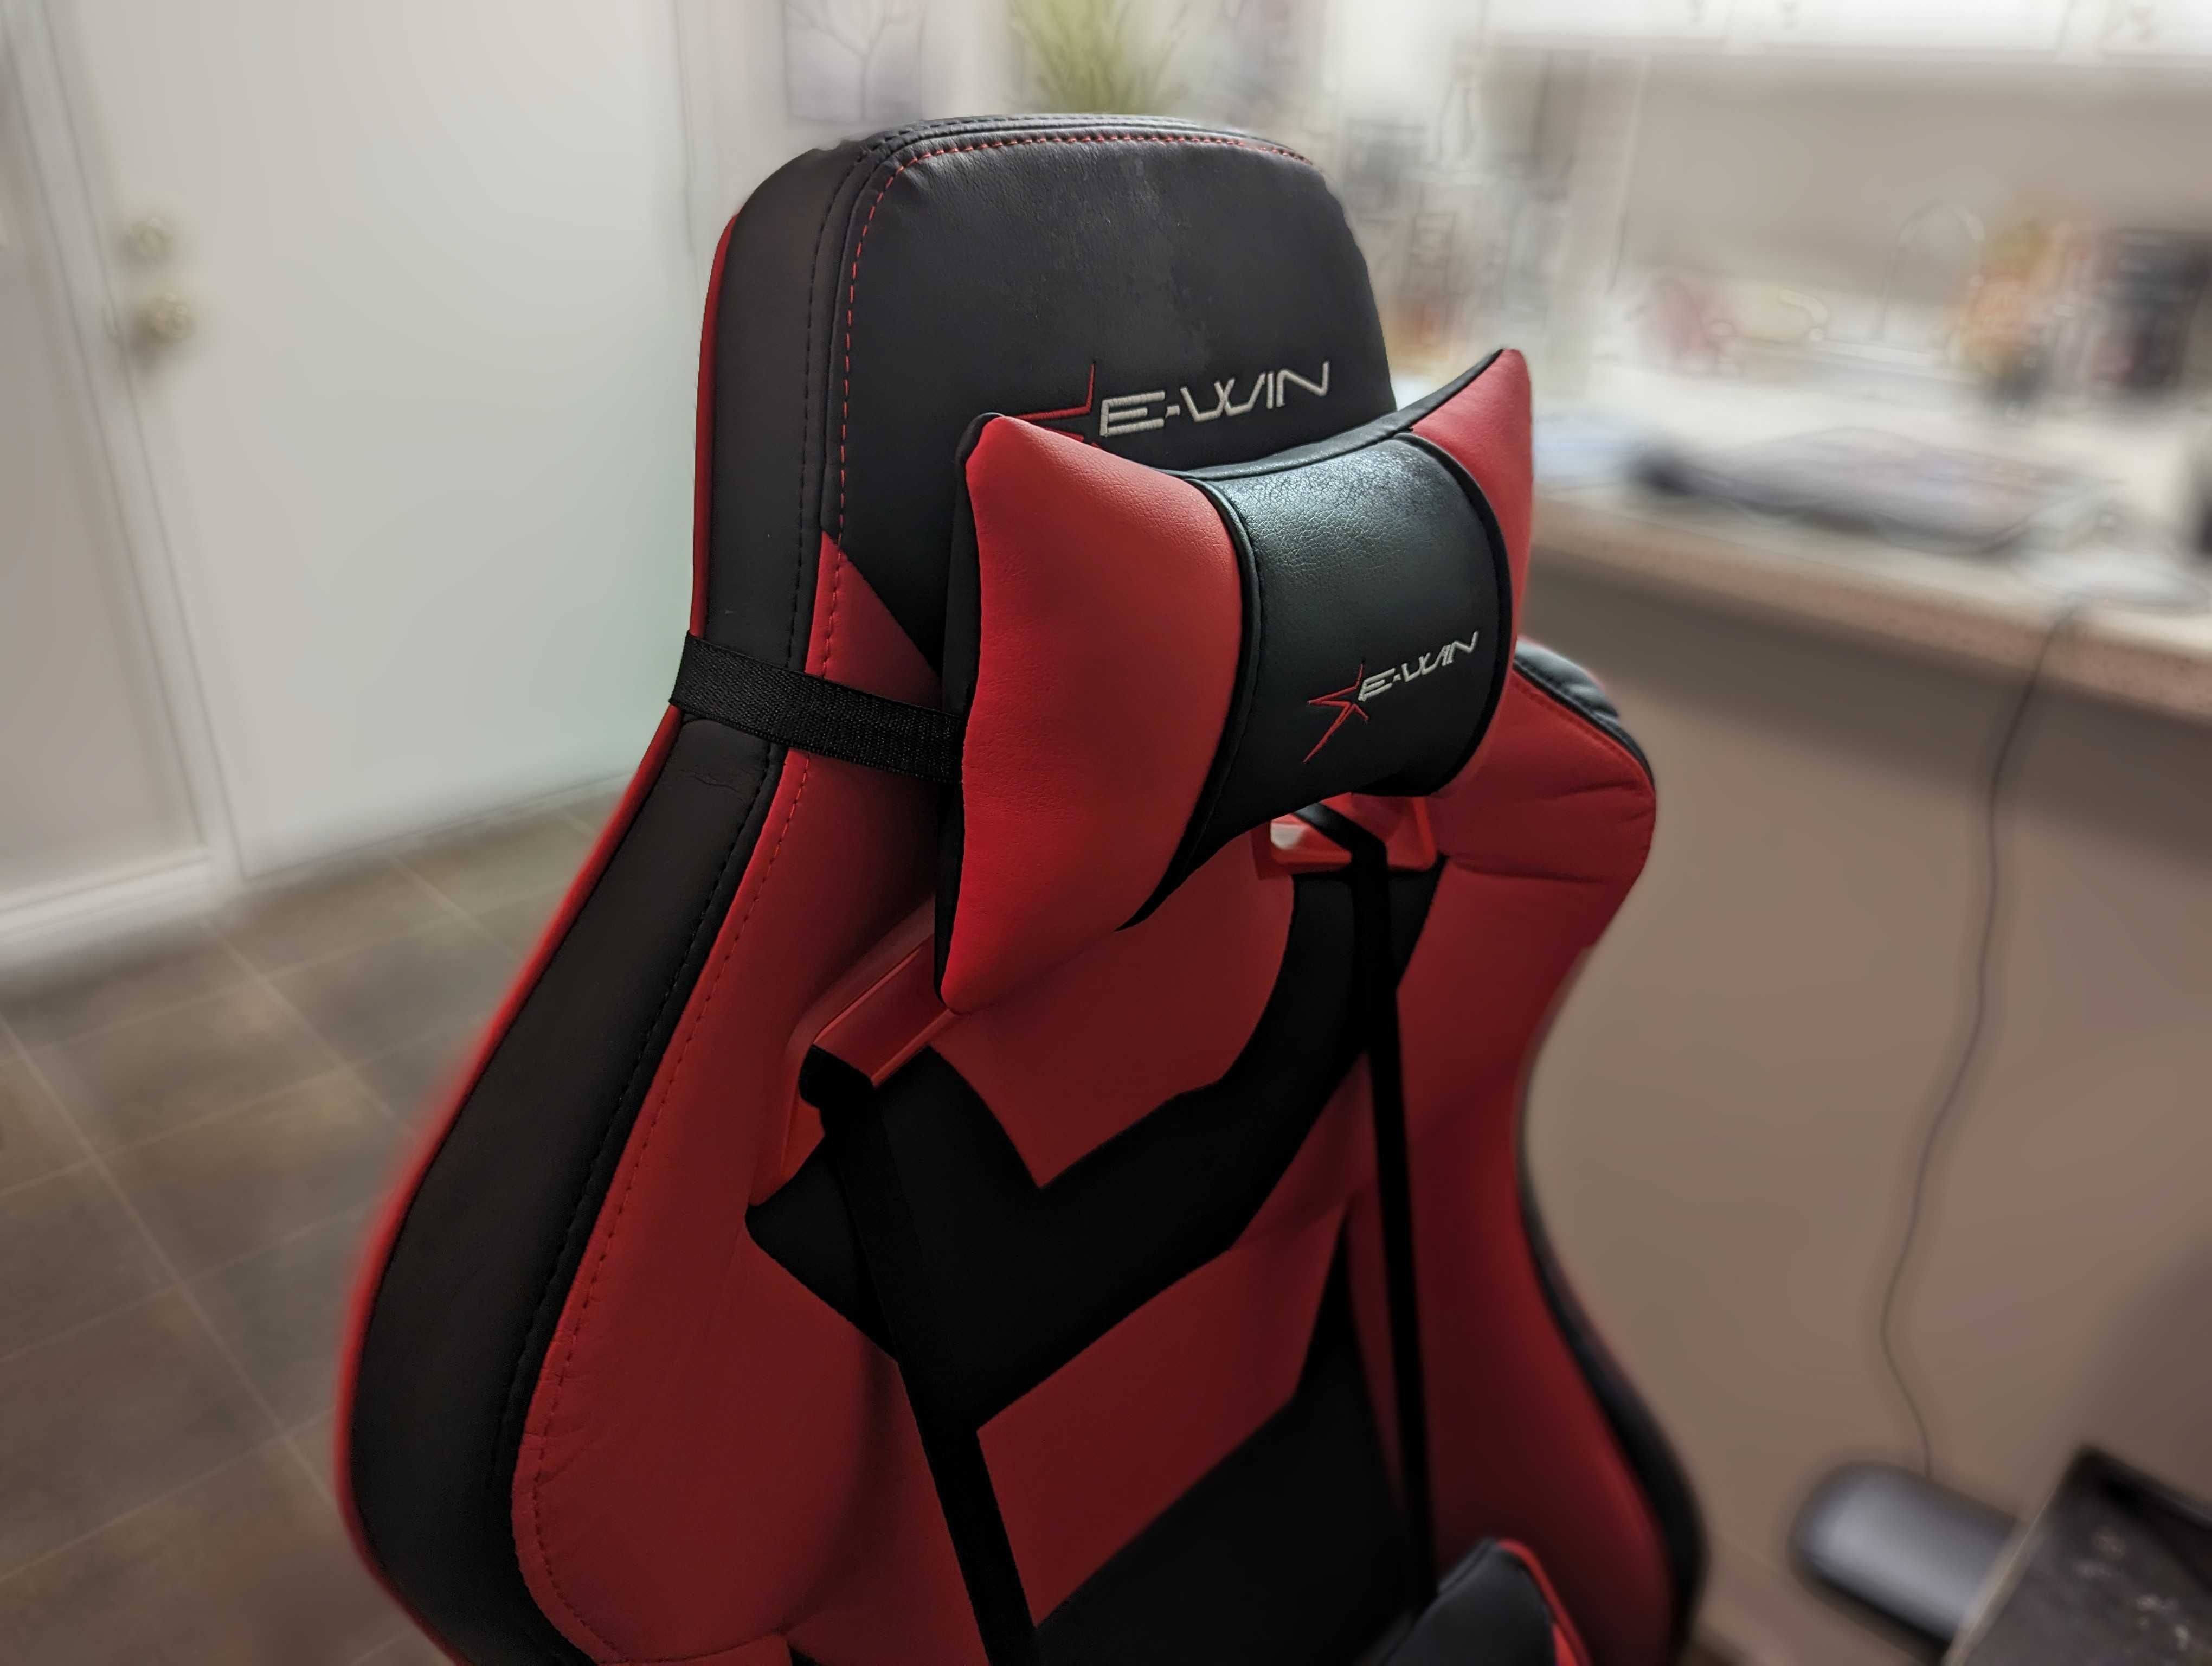 An image of the neck pillow on the E-Win Flash XL gaming chair